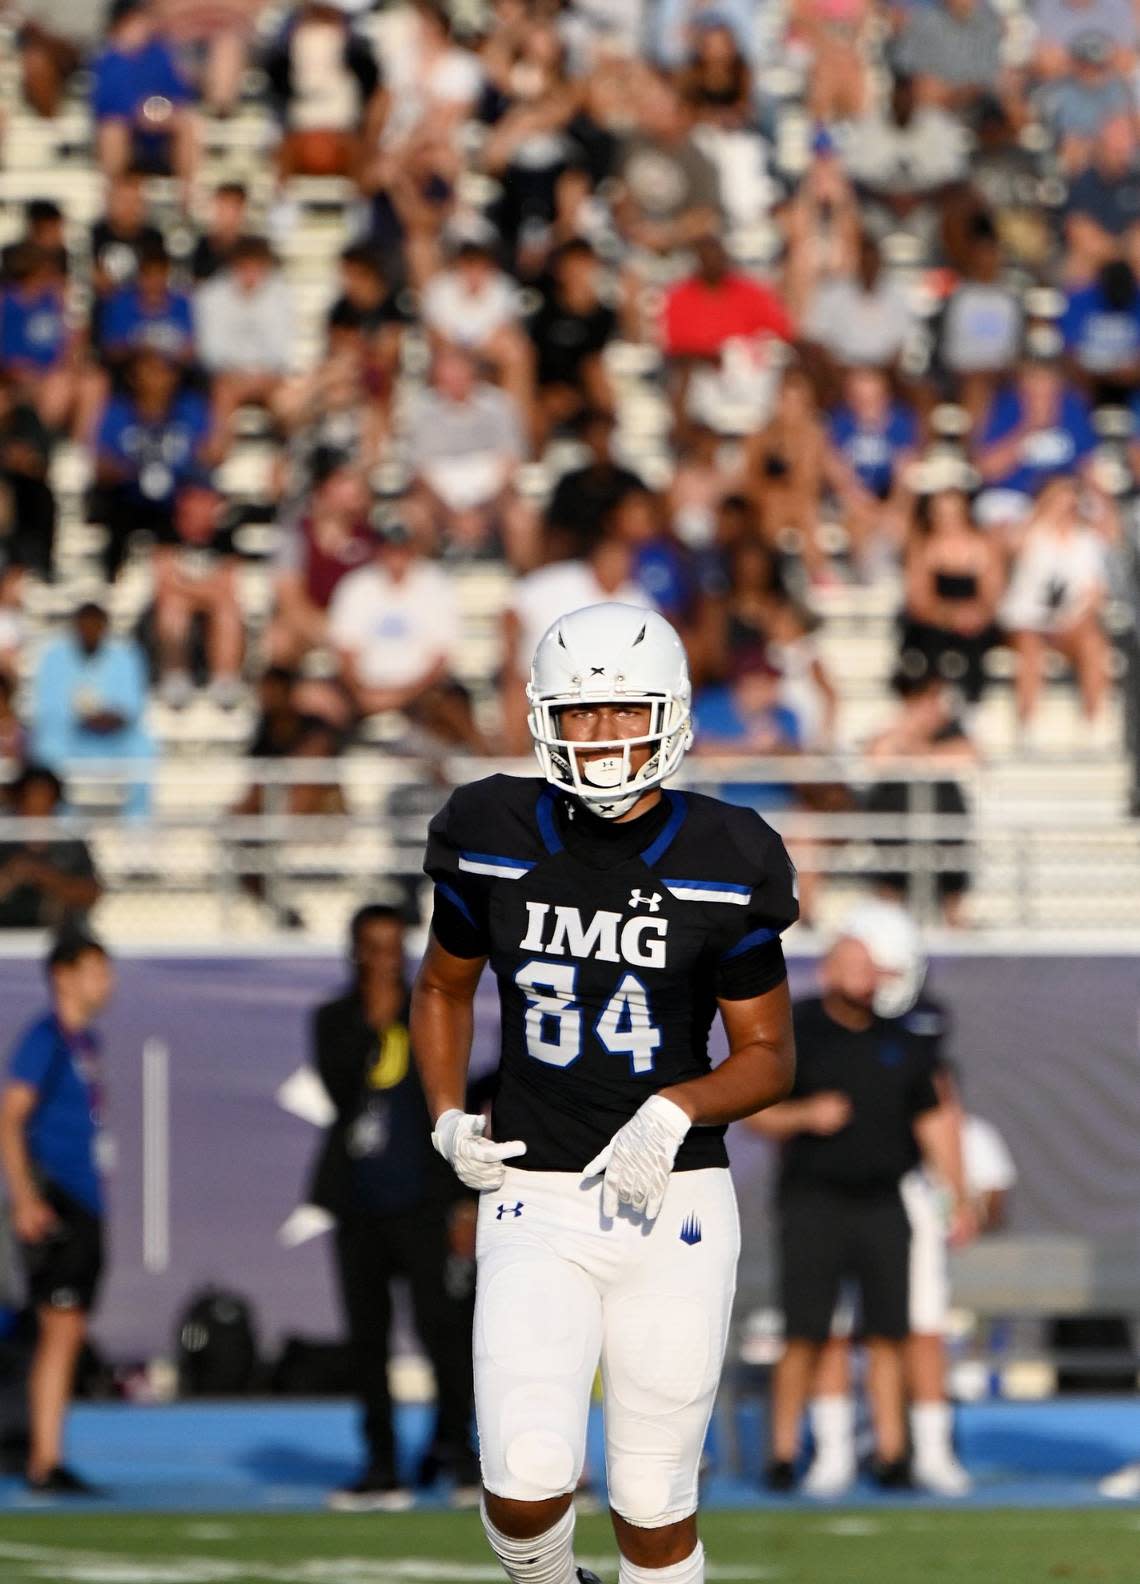 IMG Academy Riley Williams (84) during their game with Miami Central Senior High School in Bradenton, Friday, Feb. 28, 2020.(Photo/Chris Tilley)